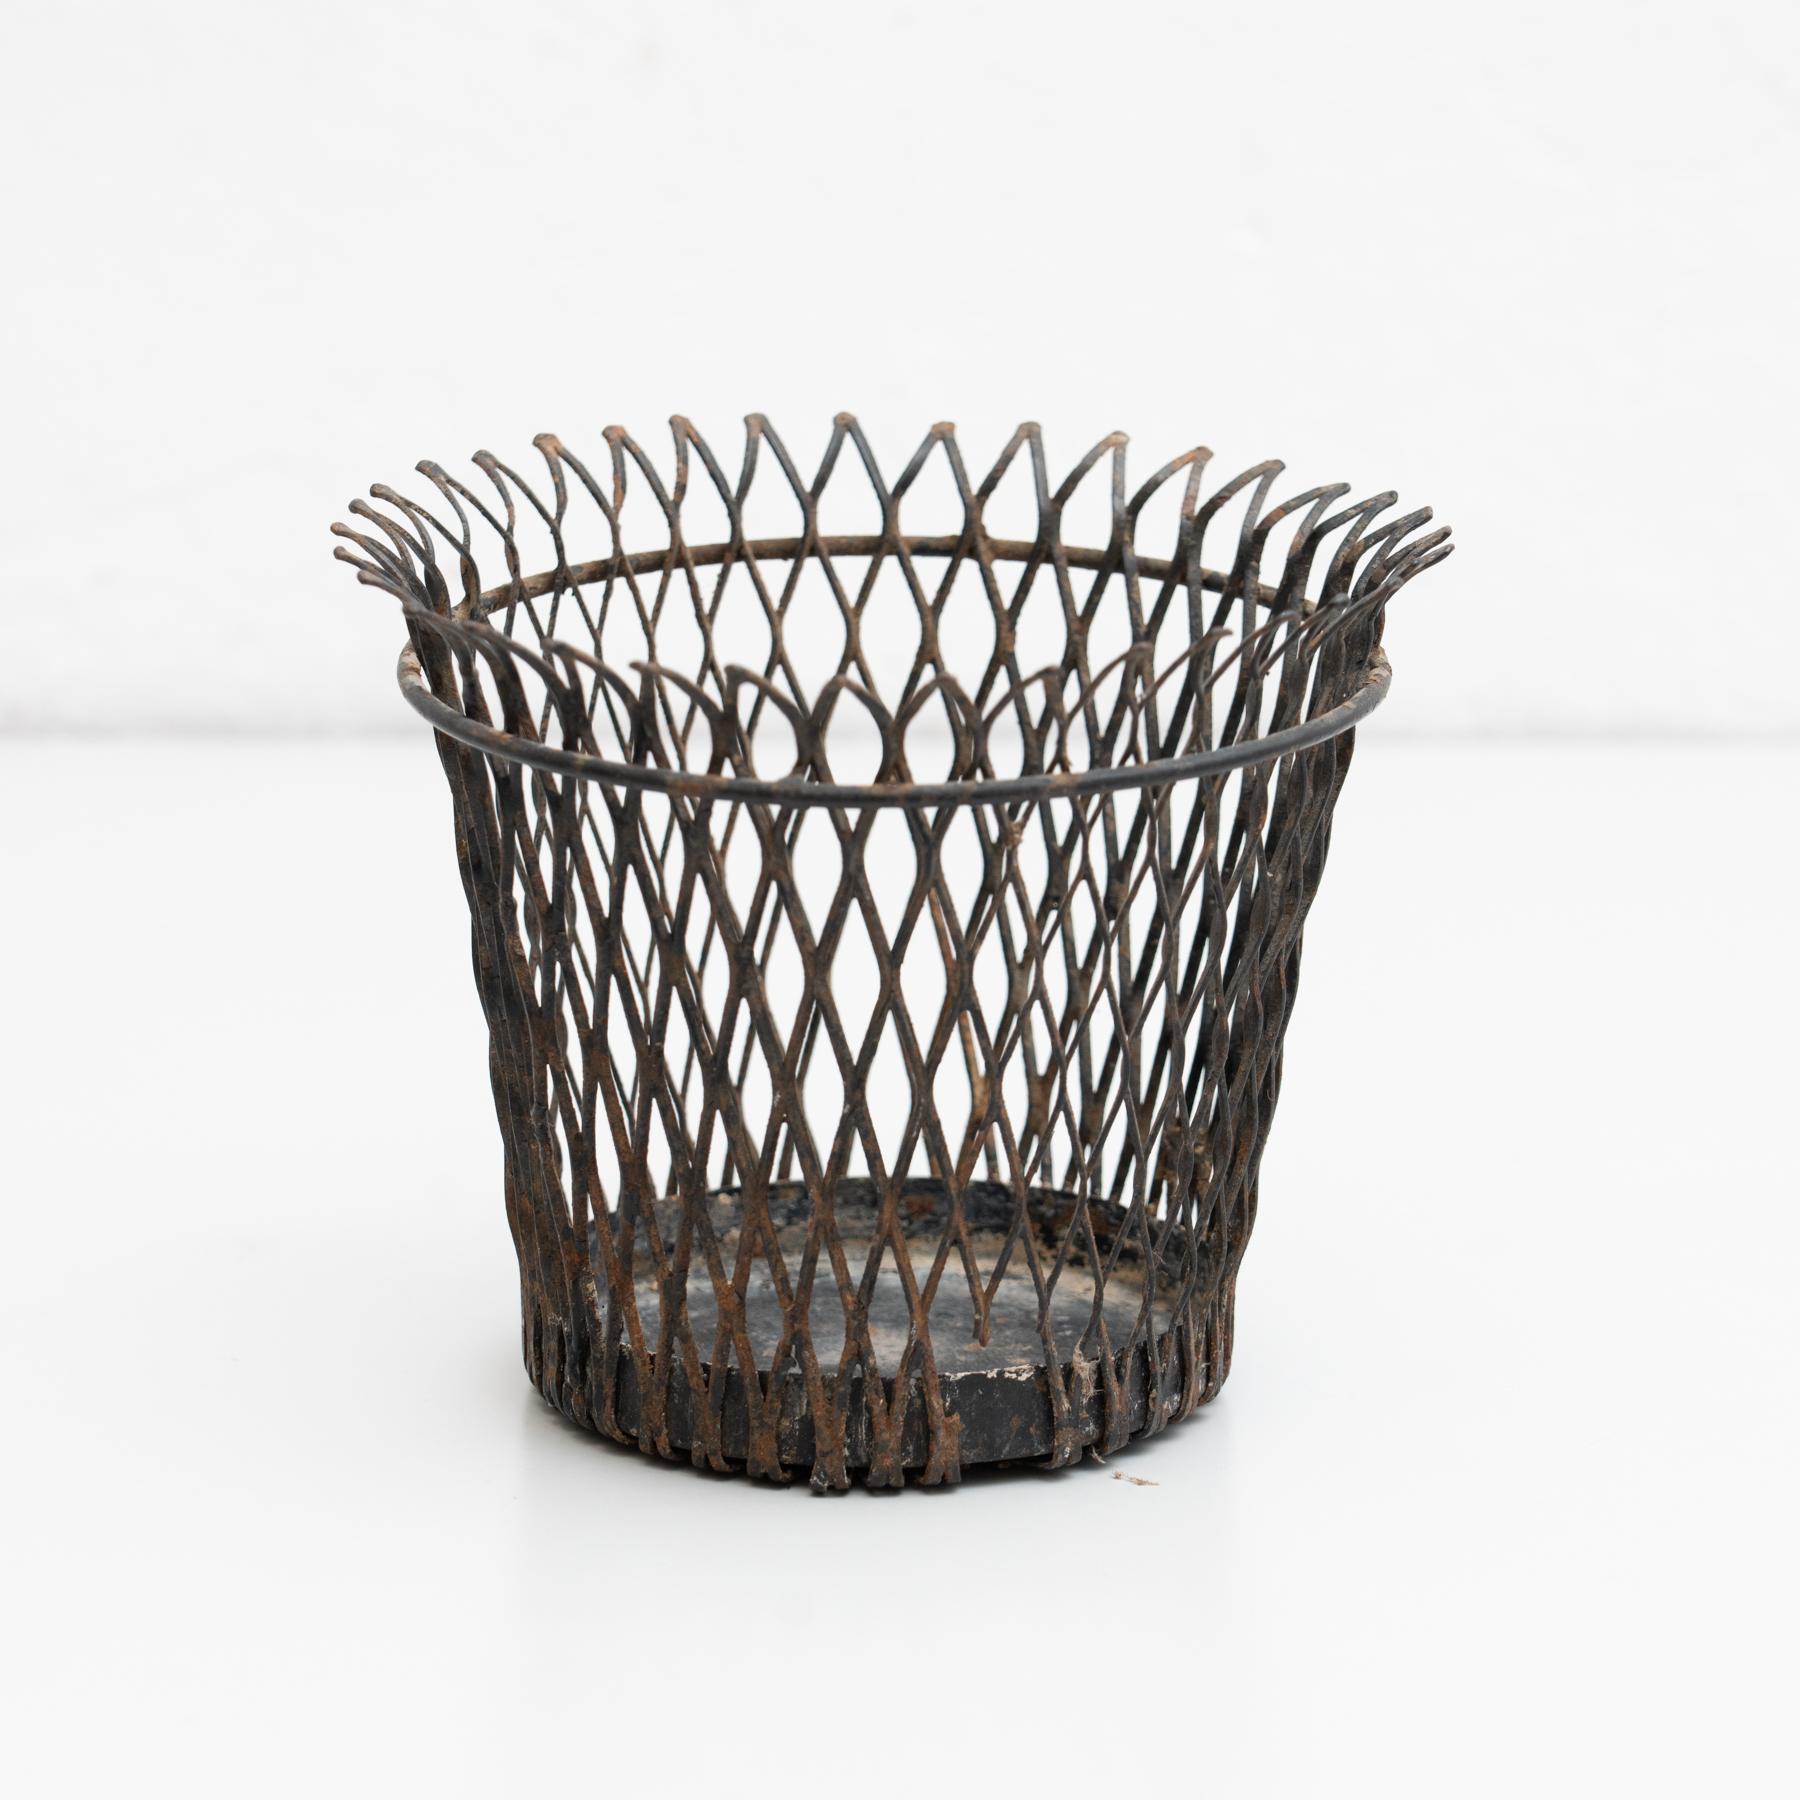 Enameled metal basket designed by Mathieu Matégot.

Manufactured by Ateliers Matégot (France,) circa 1950.

Lacquered perforated metal, it has some traces of rust.

In original condition, with wear consistent with age and use, preserving a